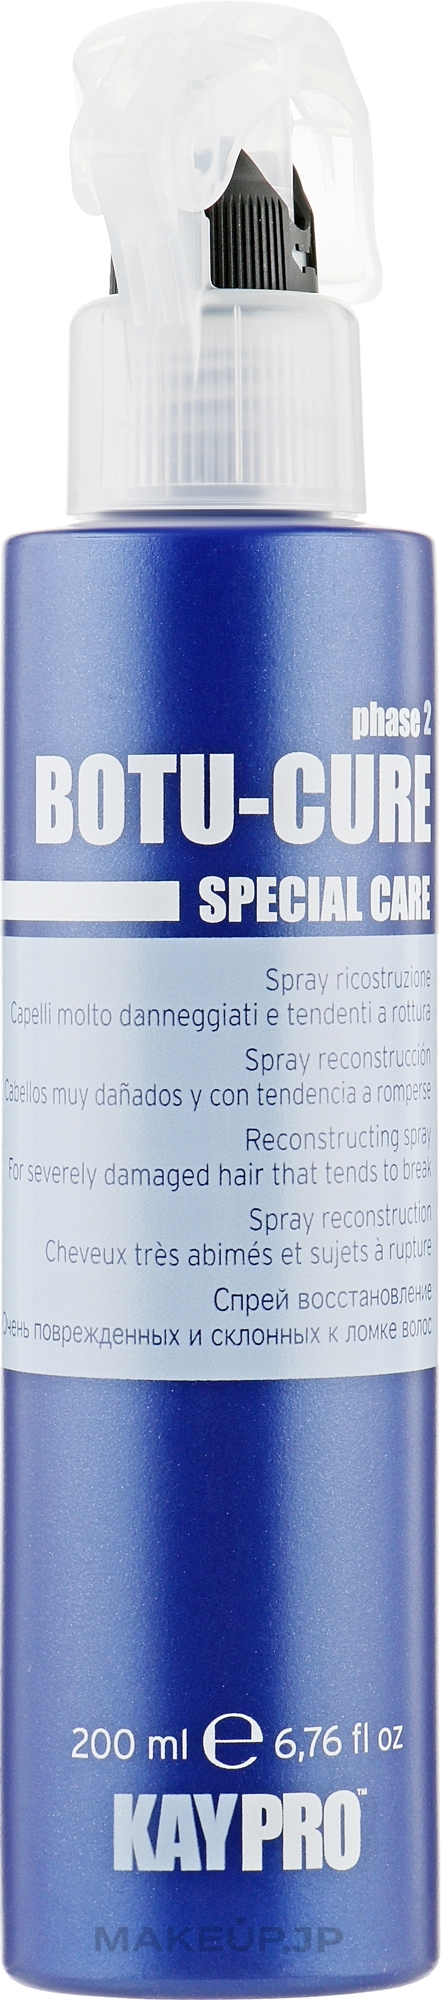 Hair Restructuring Spray - KayPro Special Care Boto-Cure Spray — photo 200 ml